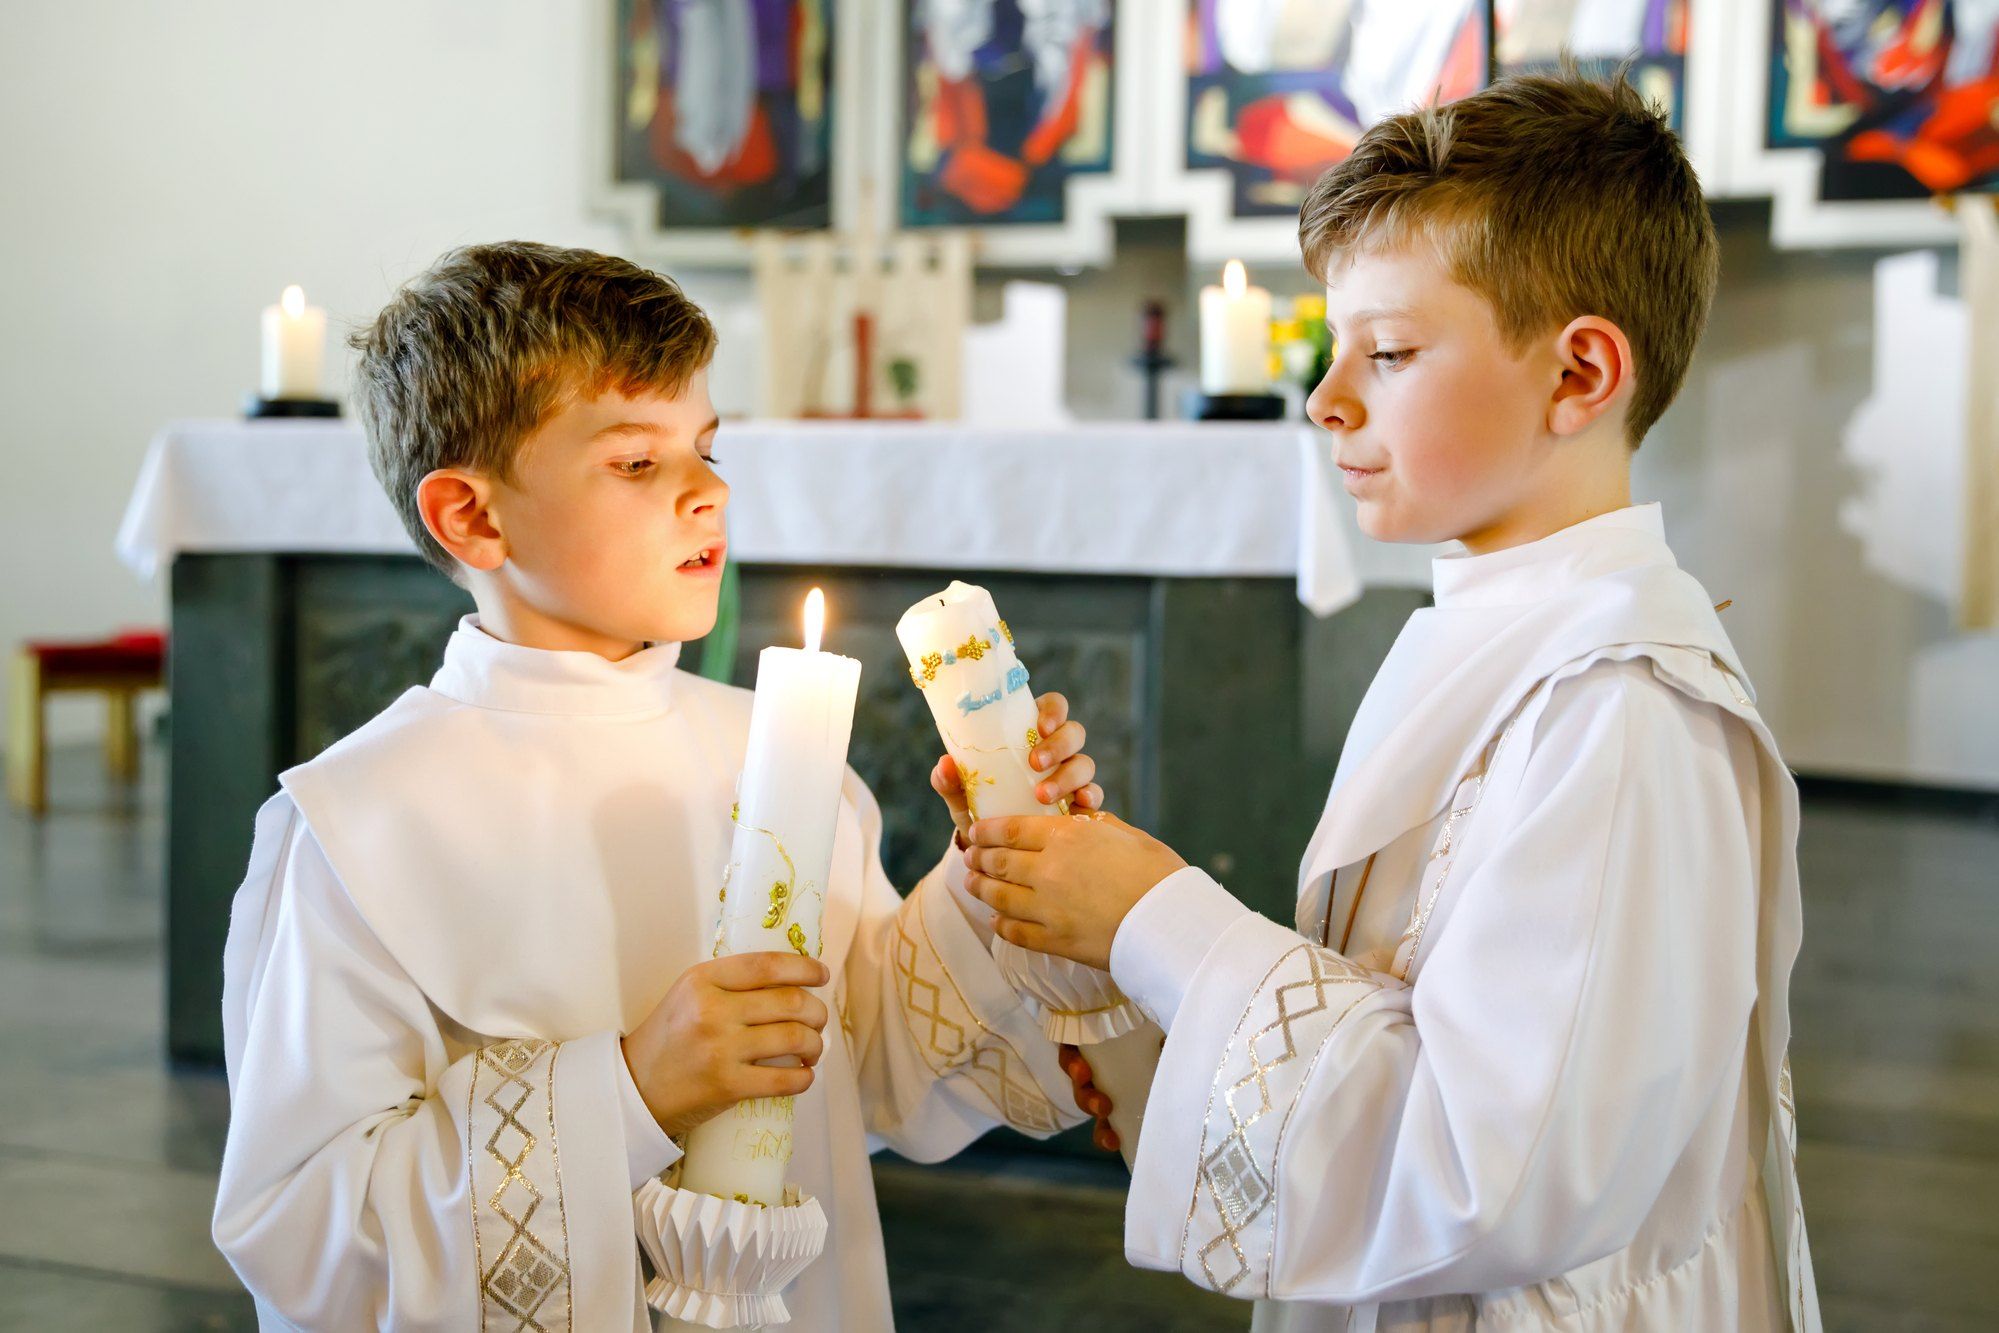 Two boys in white gowns light candles at church